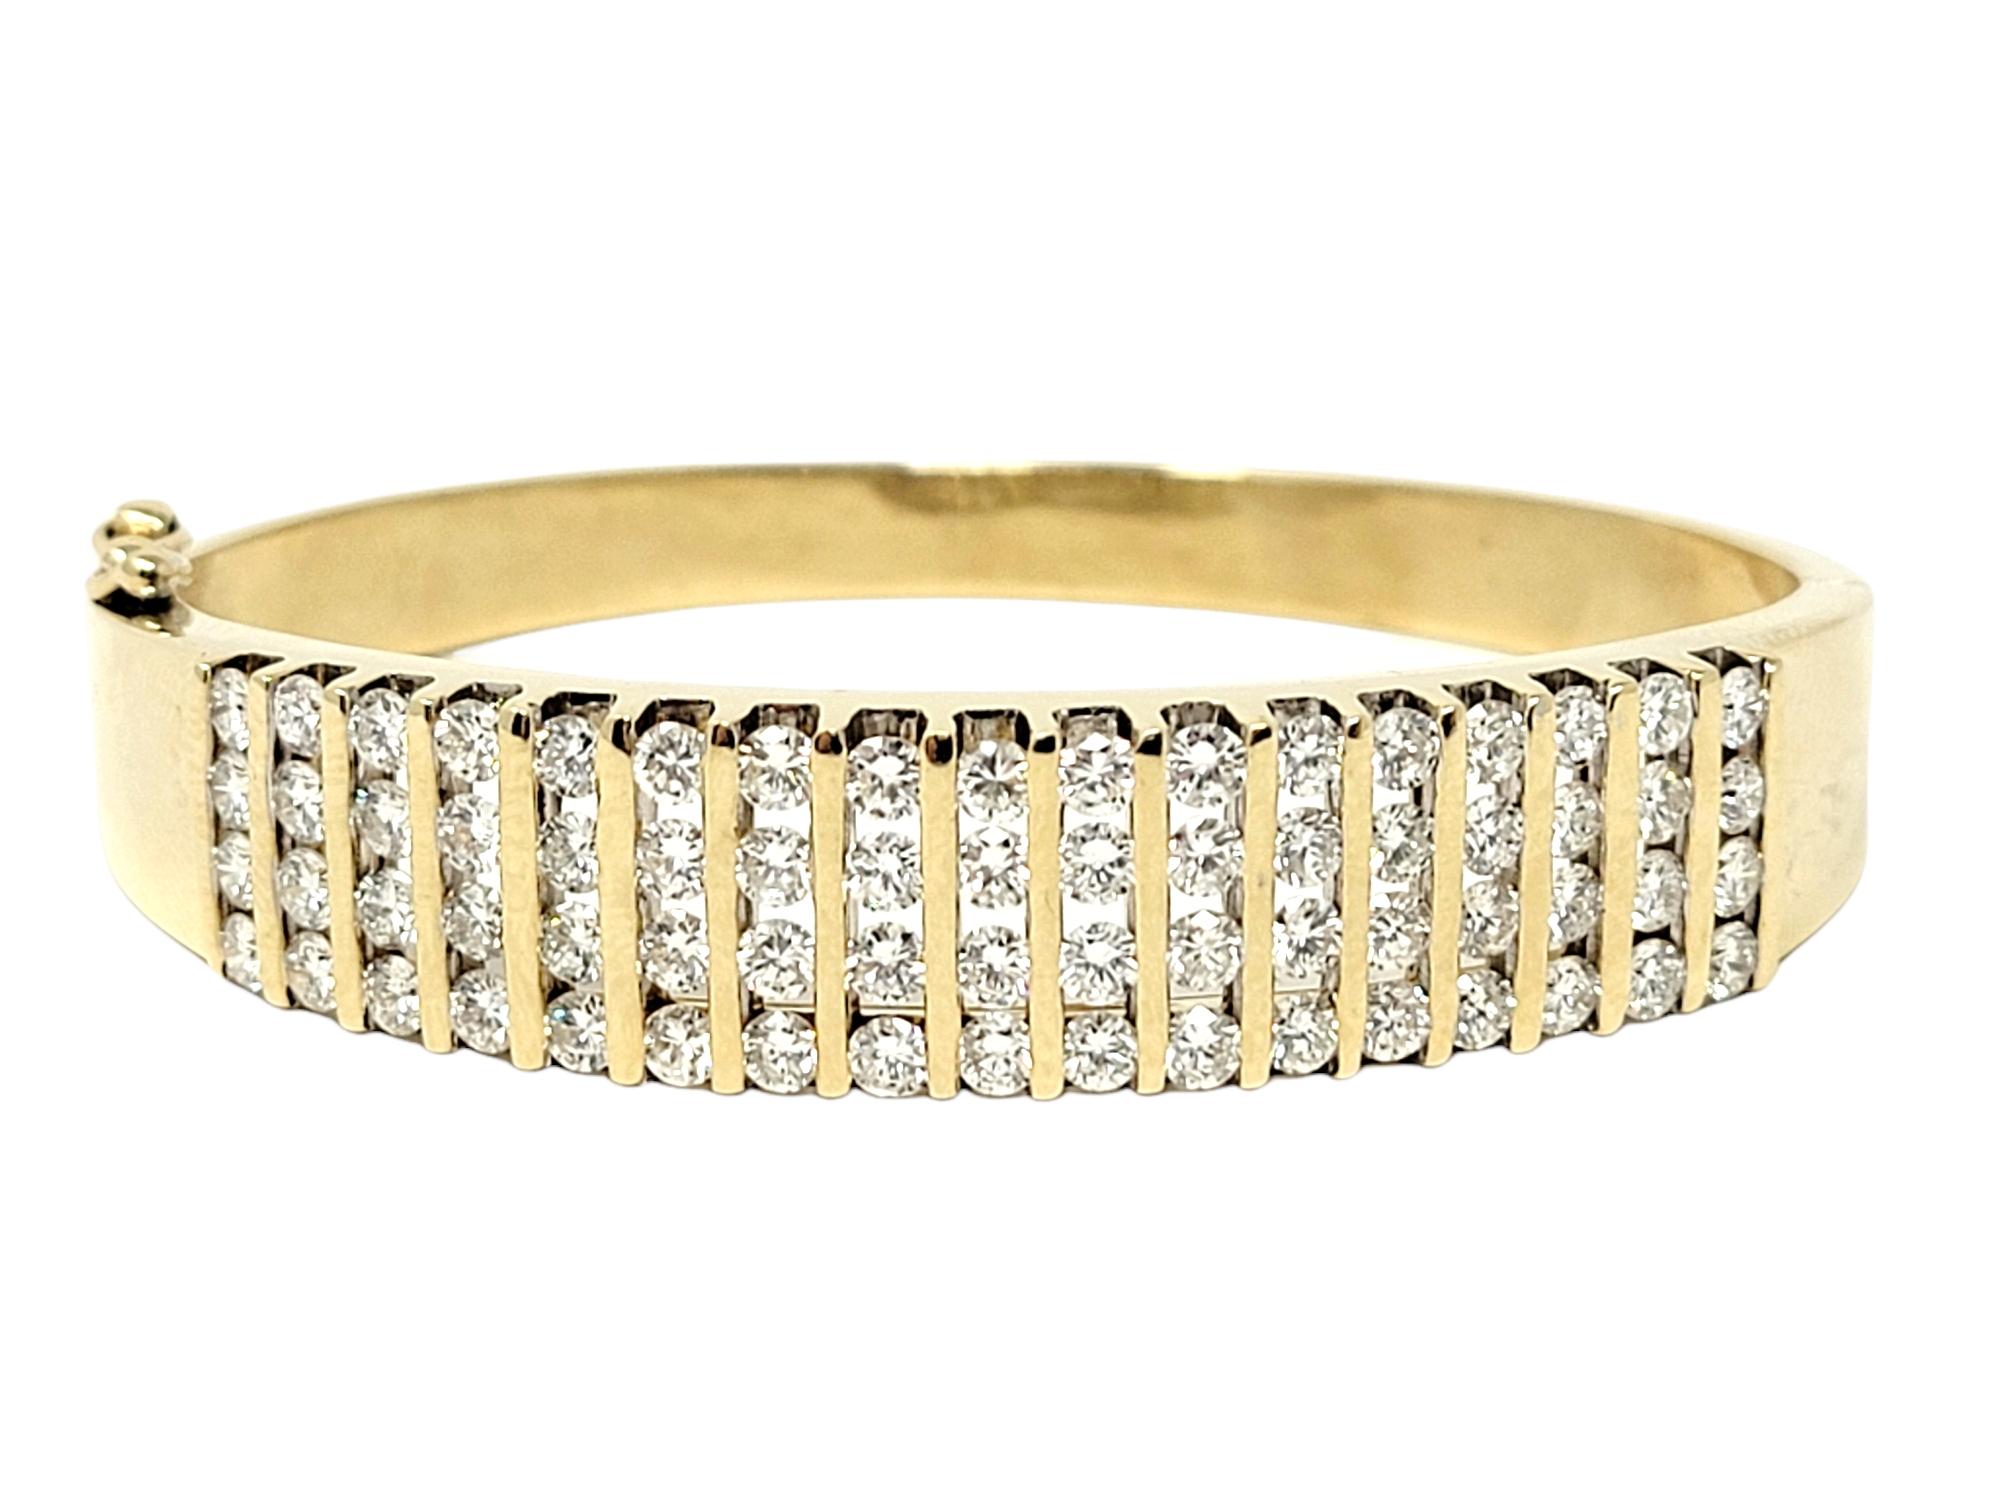 Absolutely gorgeous diamond bangle bracelet bursting with sparkle! This stunning piece features an impressive 5.50 carats total of sparkling white diamonds, round brilliant cut, H-I color and VS-SI clarity. The icy white natural diamonds are channel